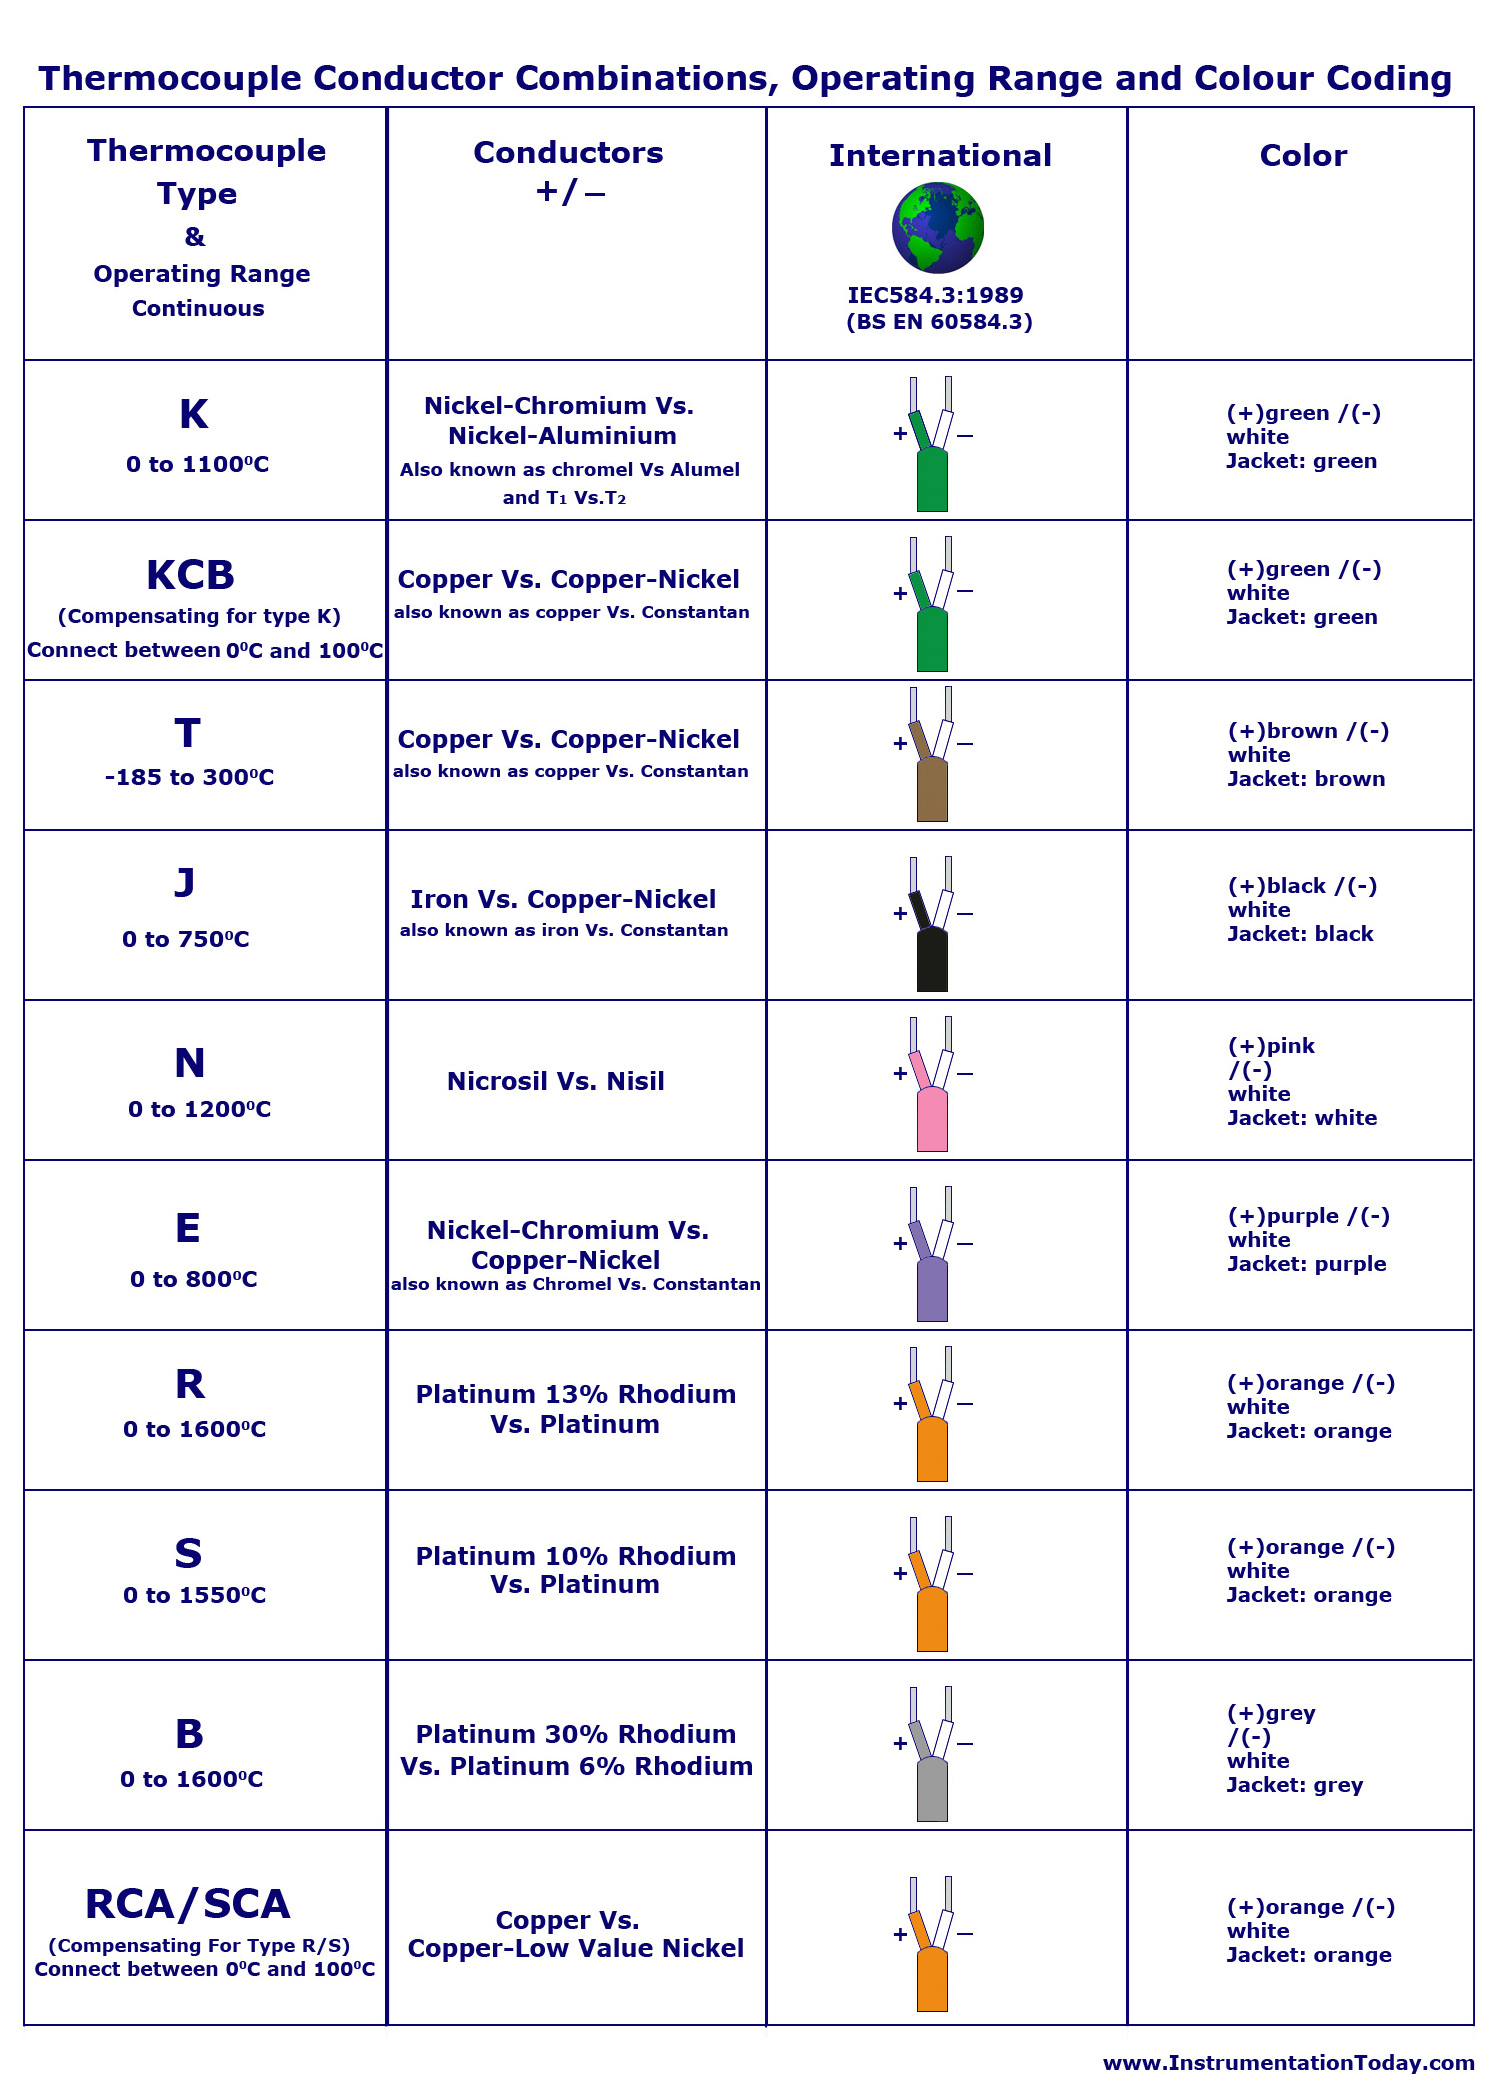 Thermocouple Conductor-Combinations,Operating Range, and Colour Coding